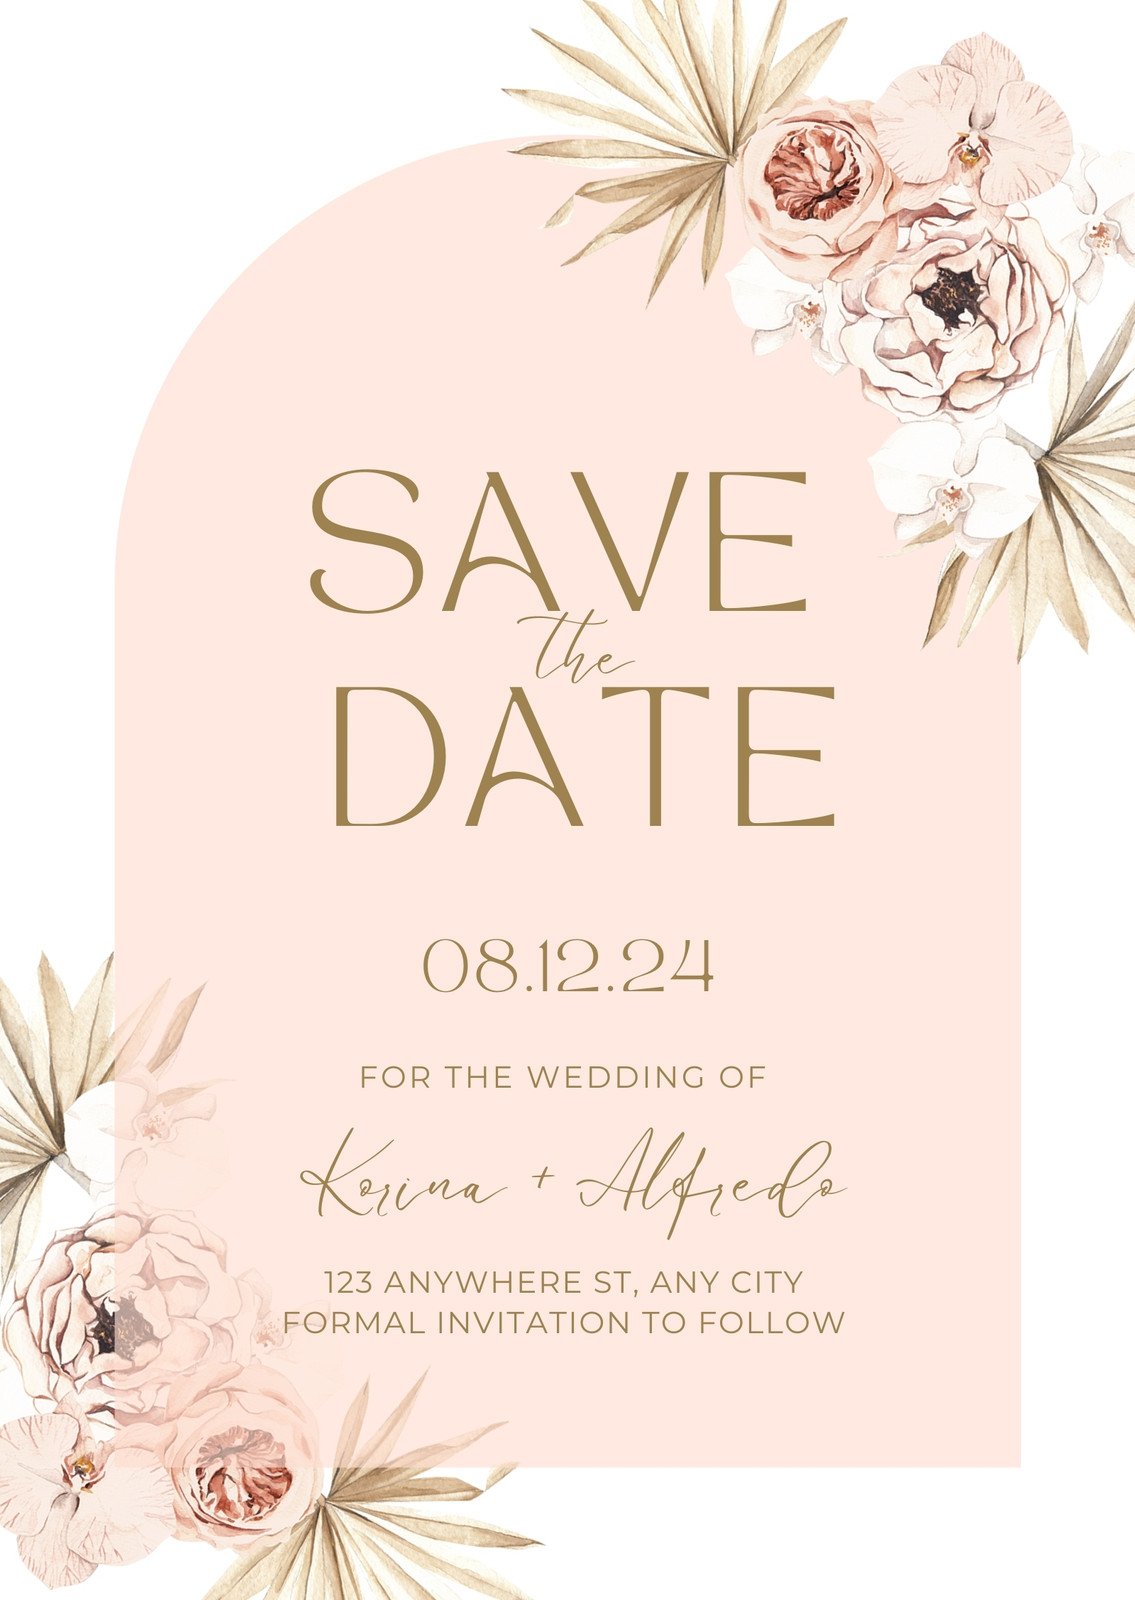 Make Your Own Save The Date Cards - Canva